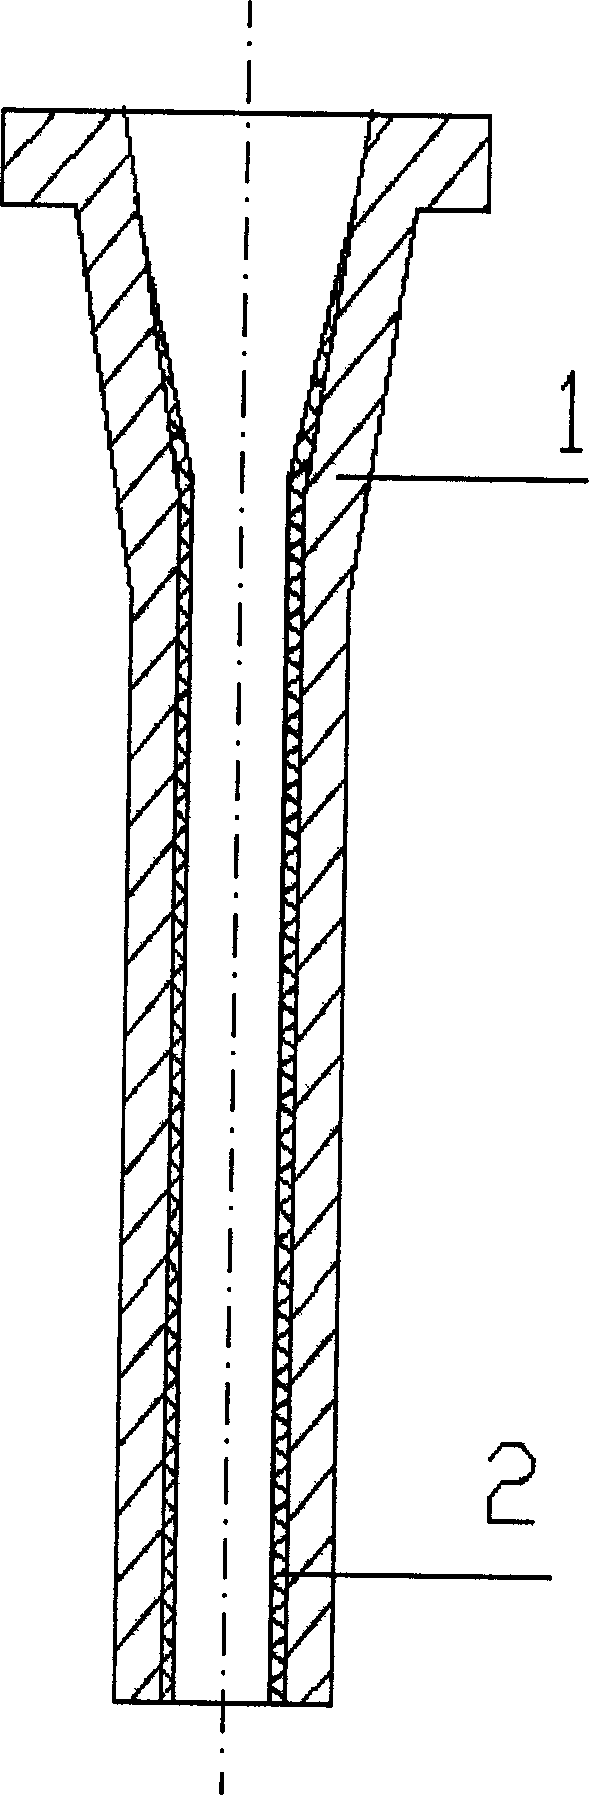 Long nozzle in composite structure free from prewarming